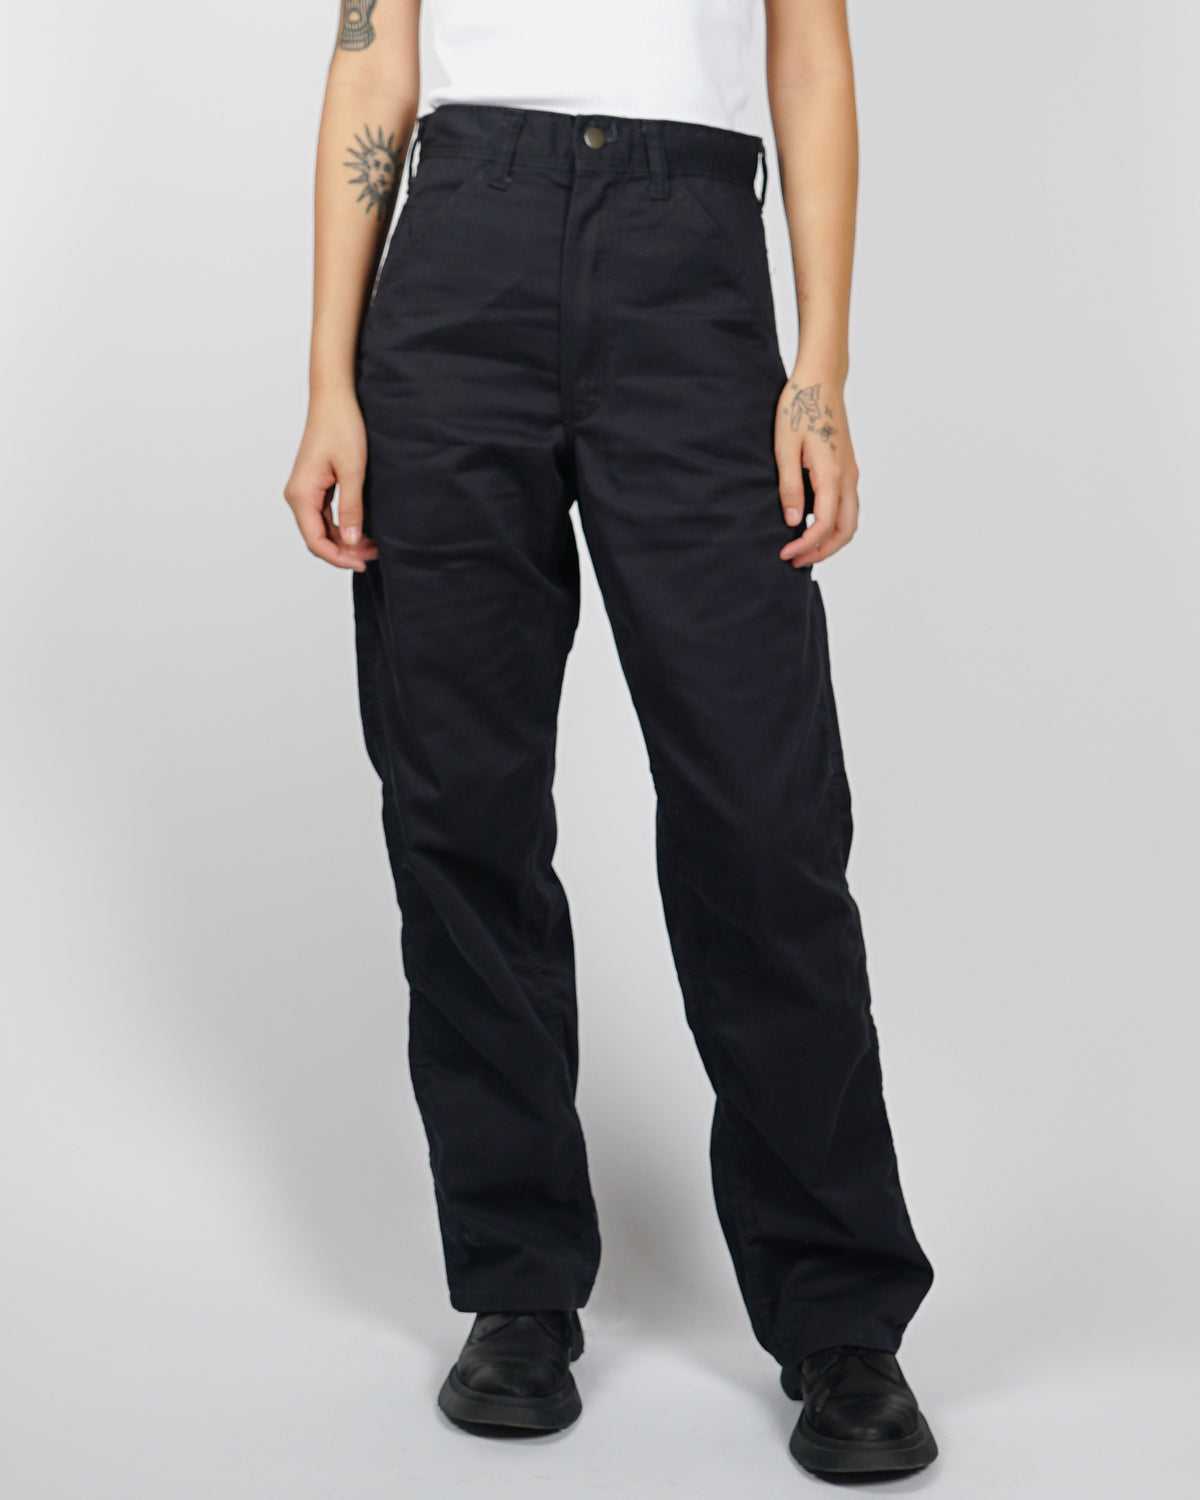 Buy Stan Ray Chinos trousers & Pants - Men